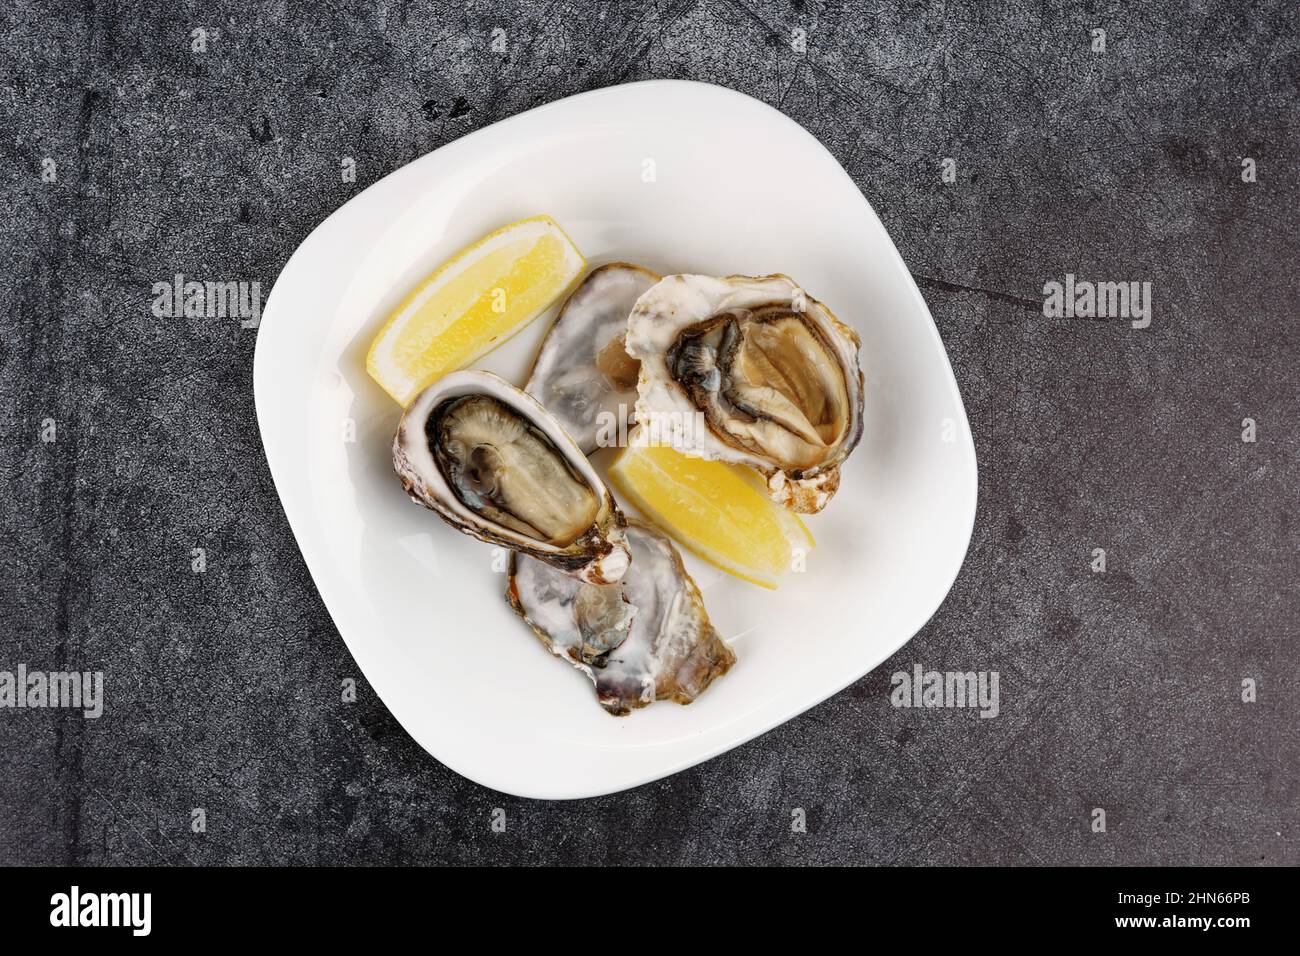 Oysters in plate on black background Stock Photo